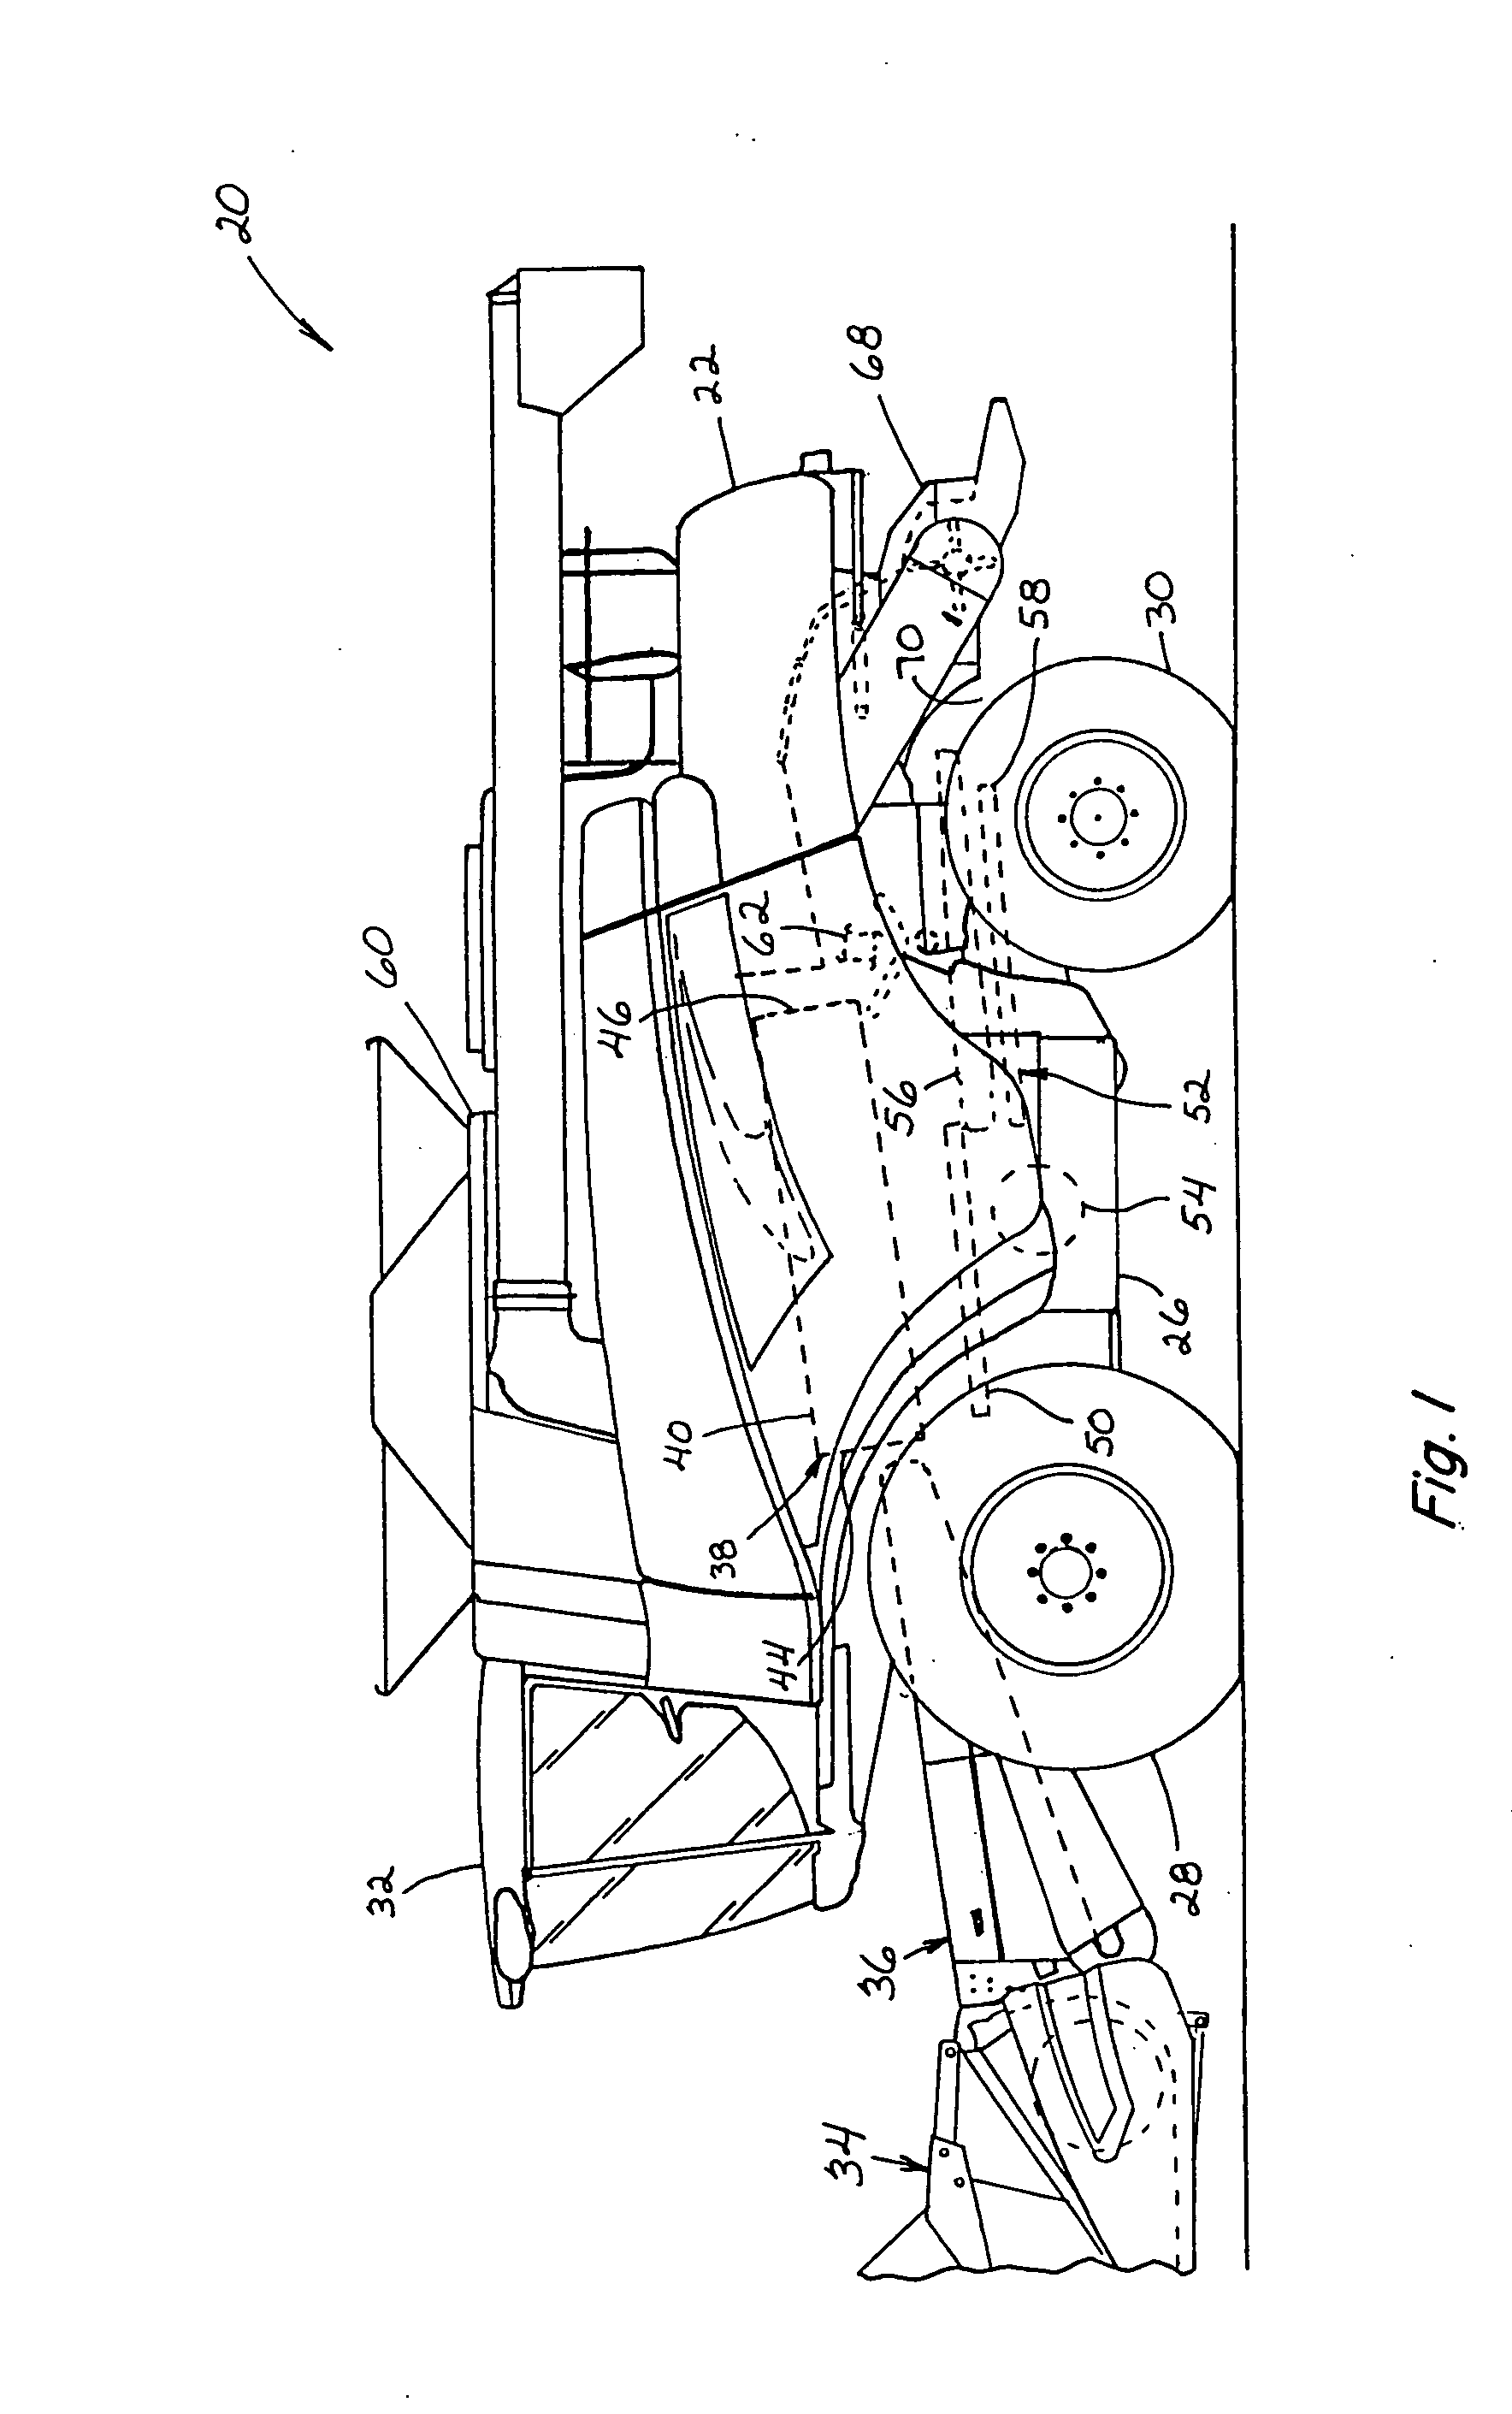 System and method for detecting a condition indicative of plugging of a discharge path of an agricultural combine